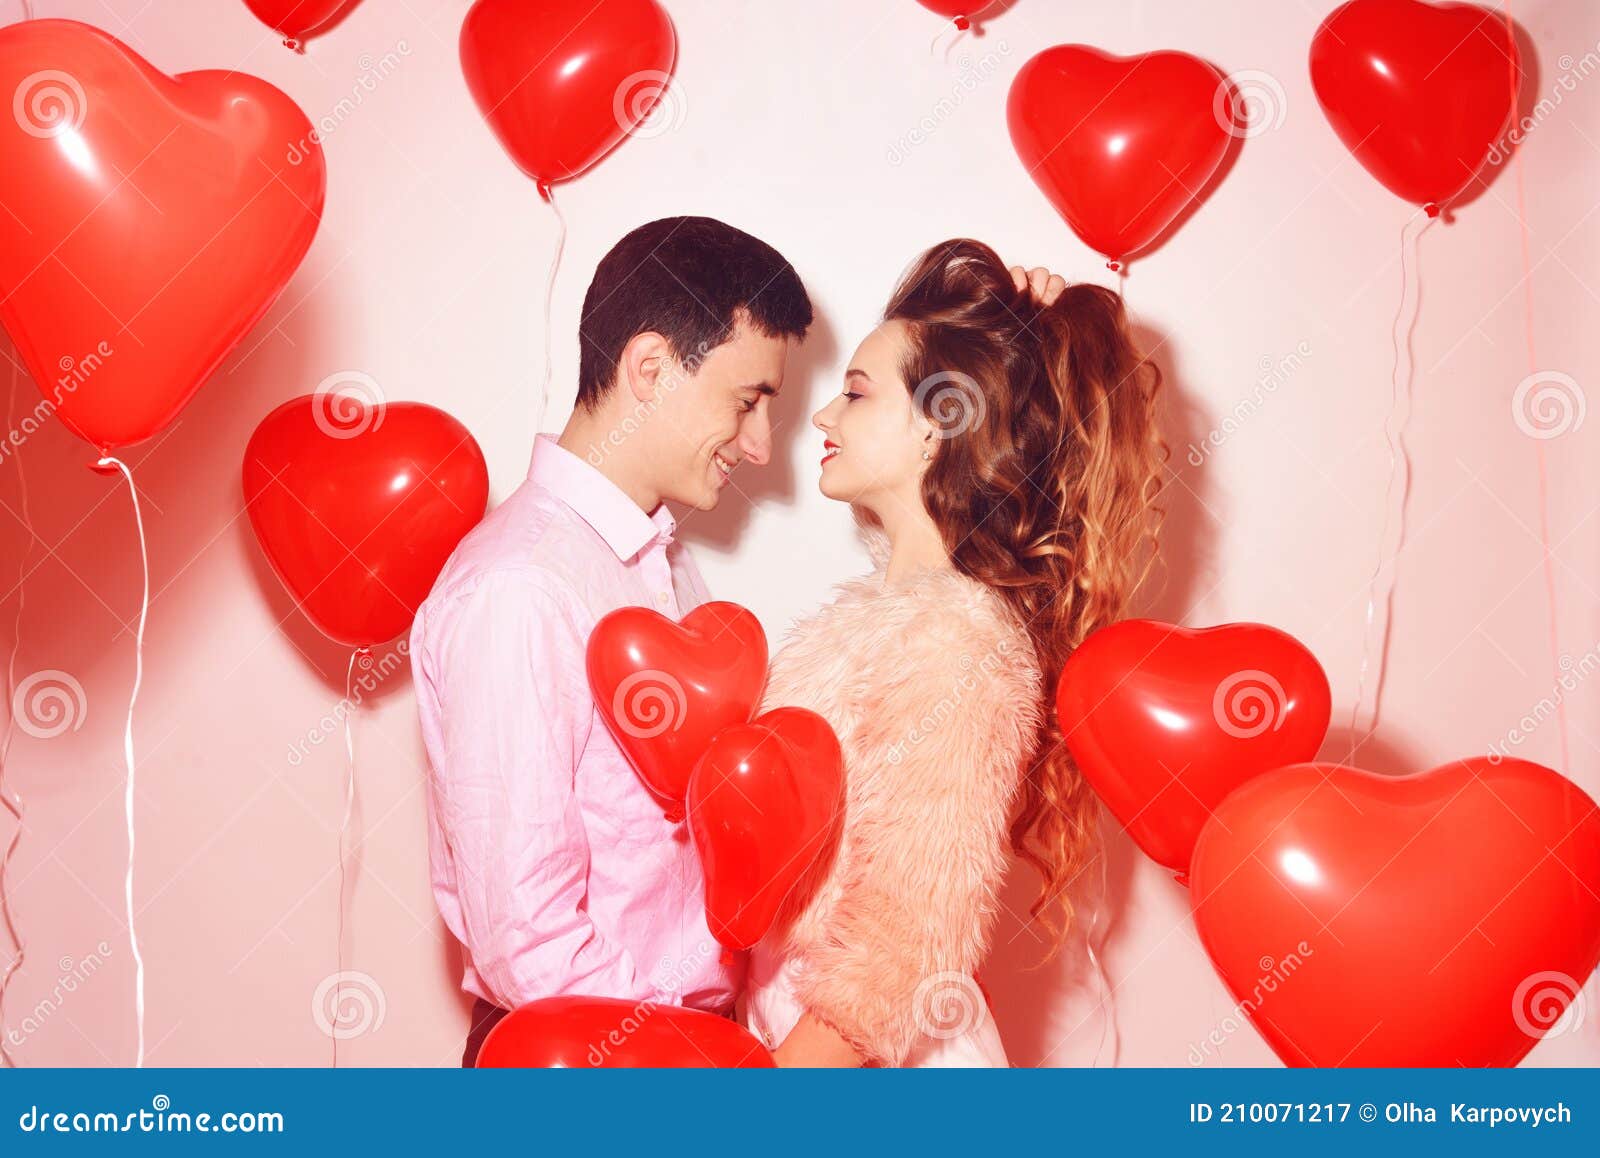 man with his lovely sweetheart girl kiss at lover`s valentine day. valentine couple. couple kiss and hug. on background red